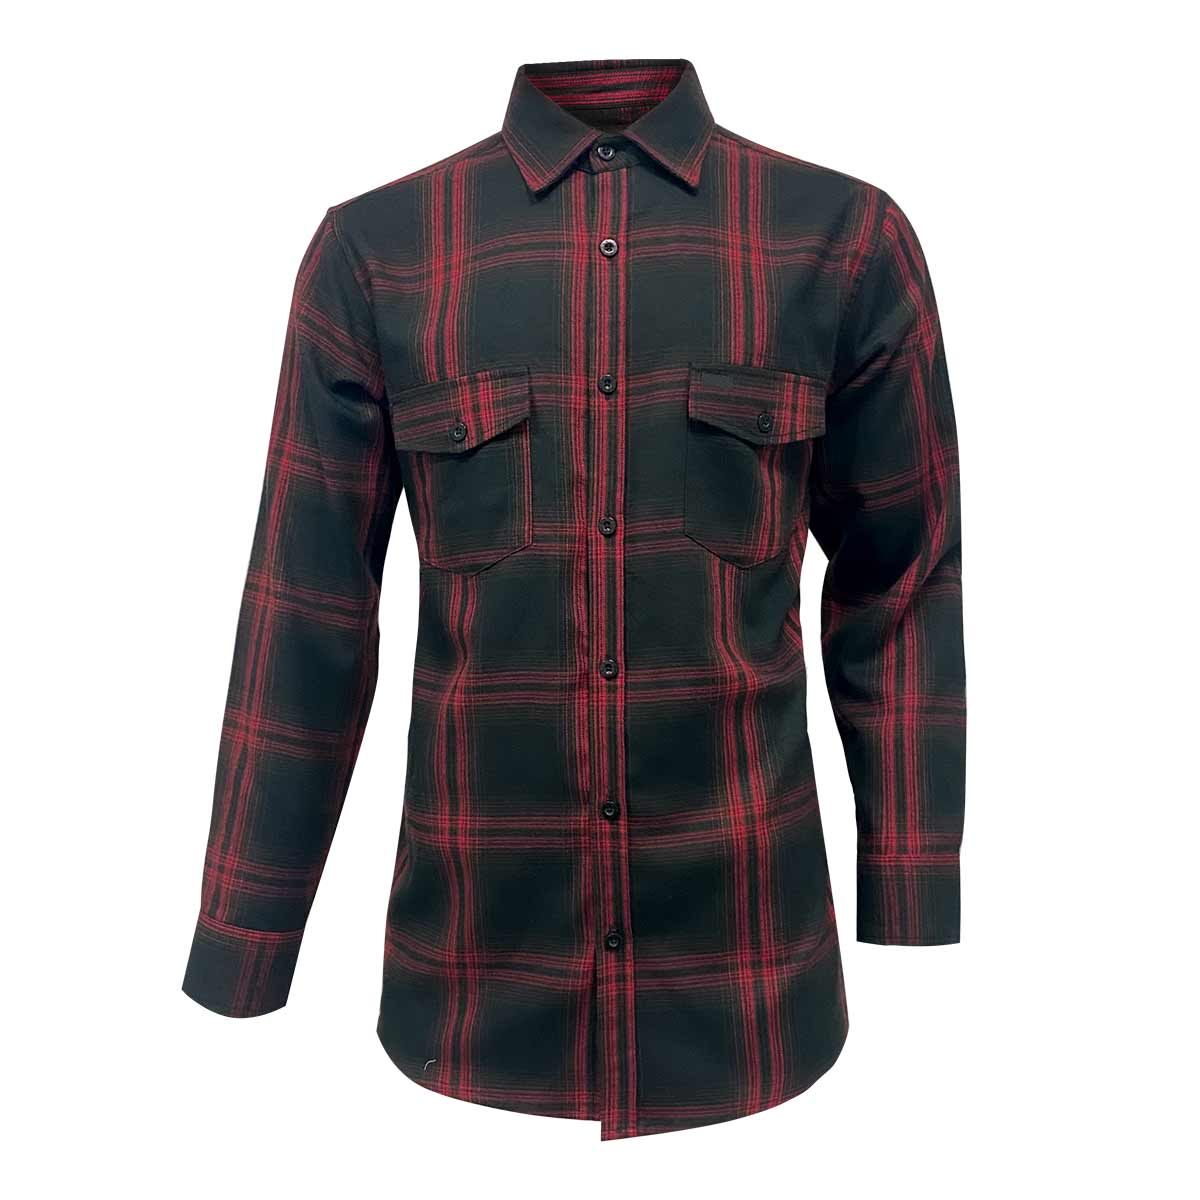 Flannel Shirt Suppliers and Factory - China Flannel Shirt Manufacturers